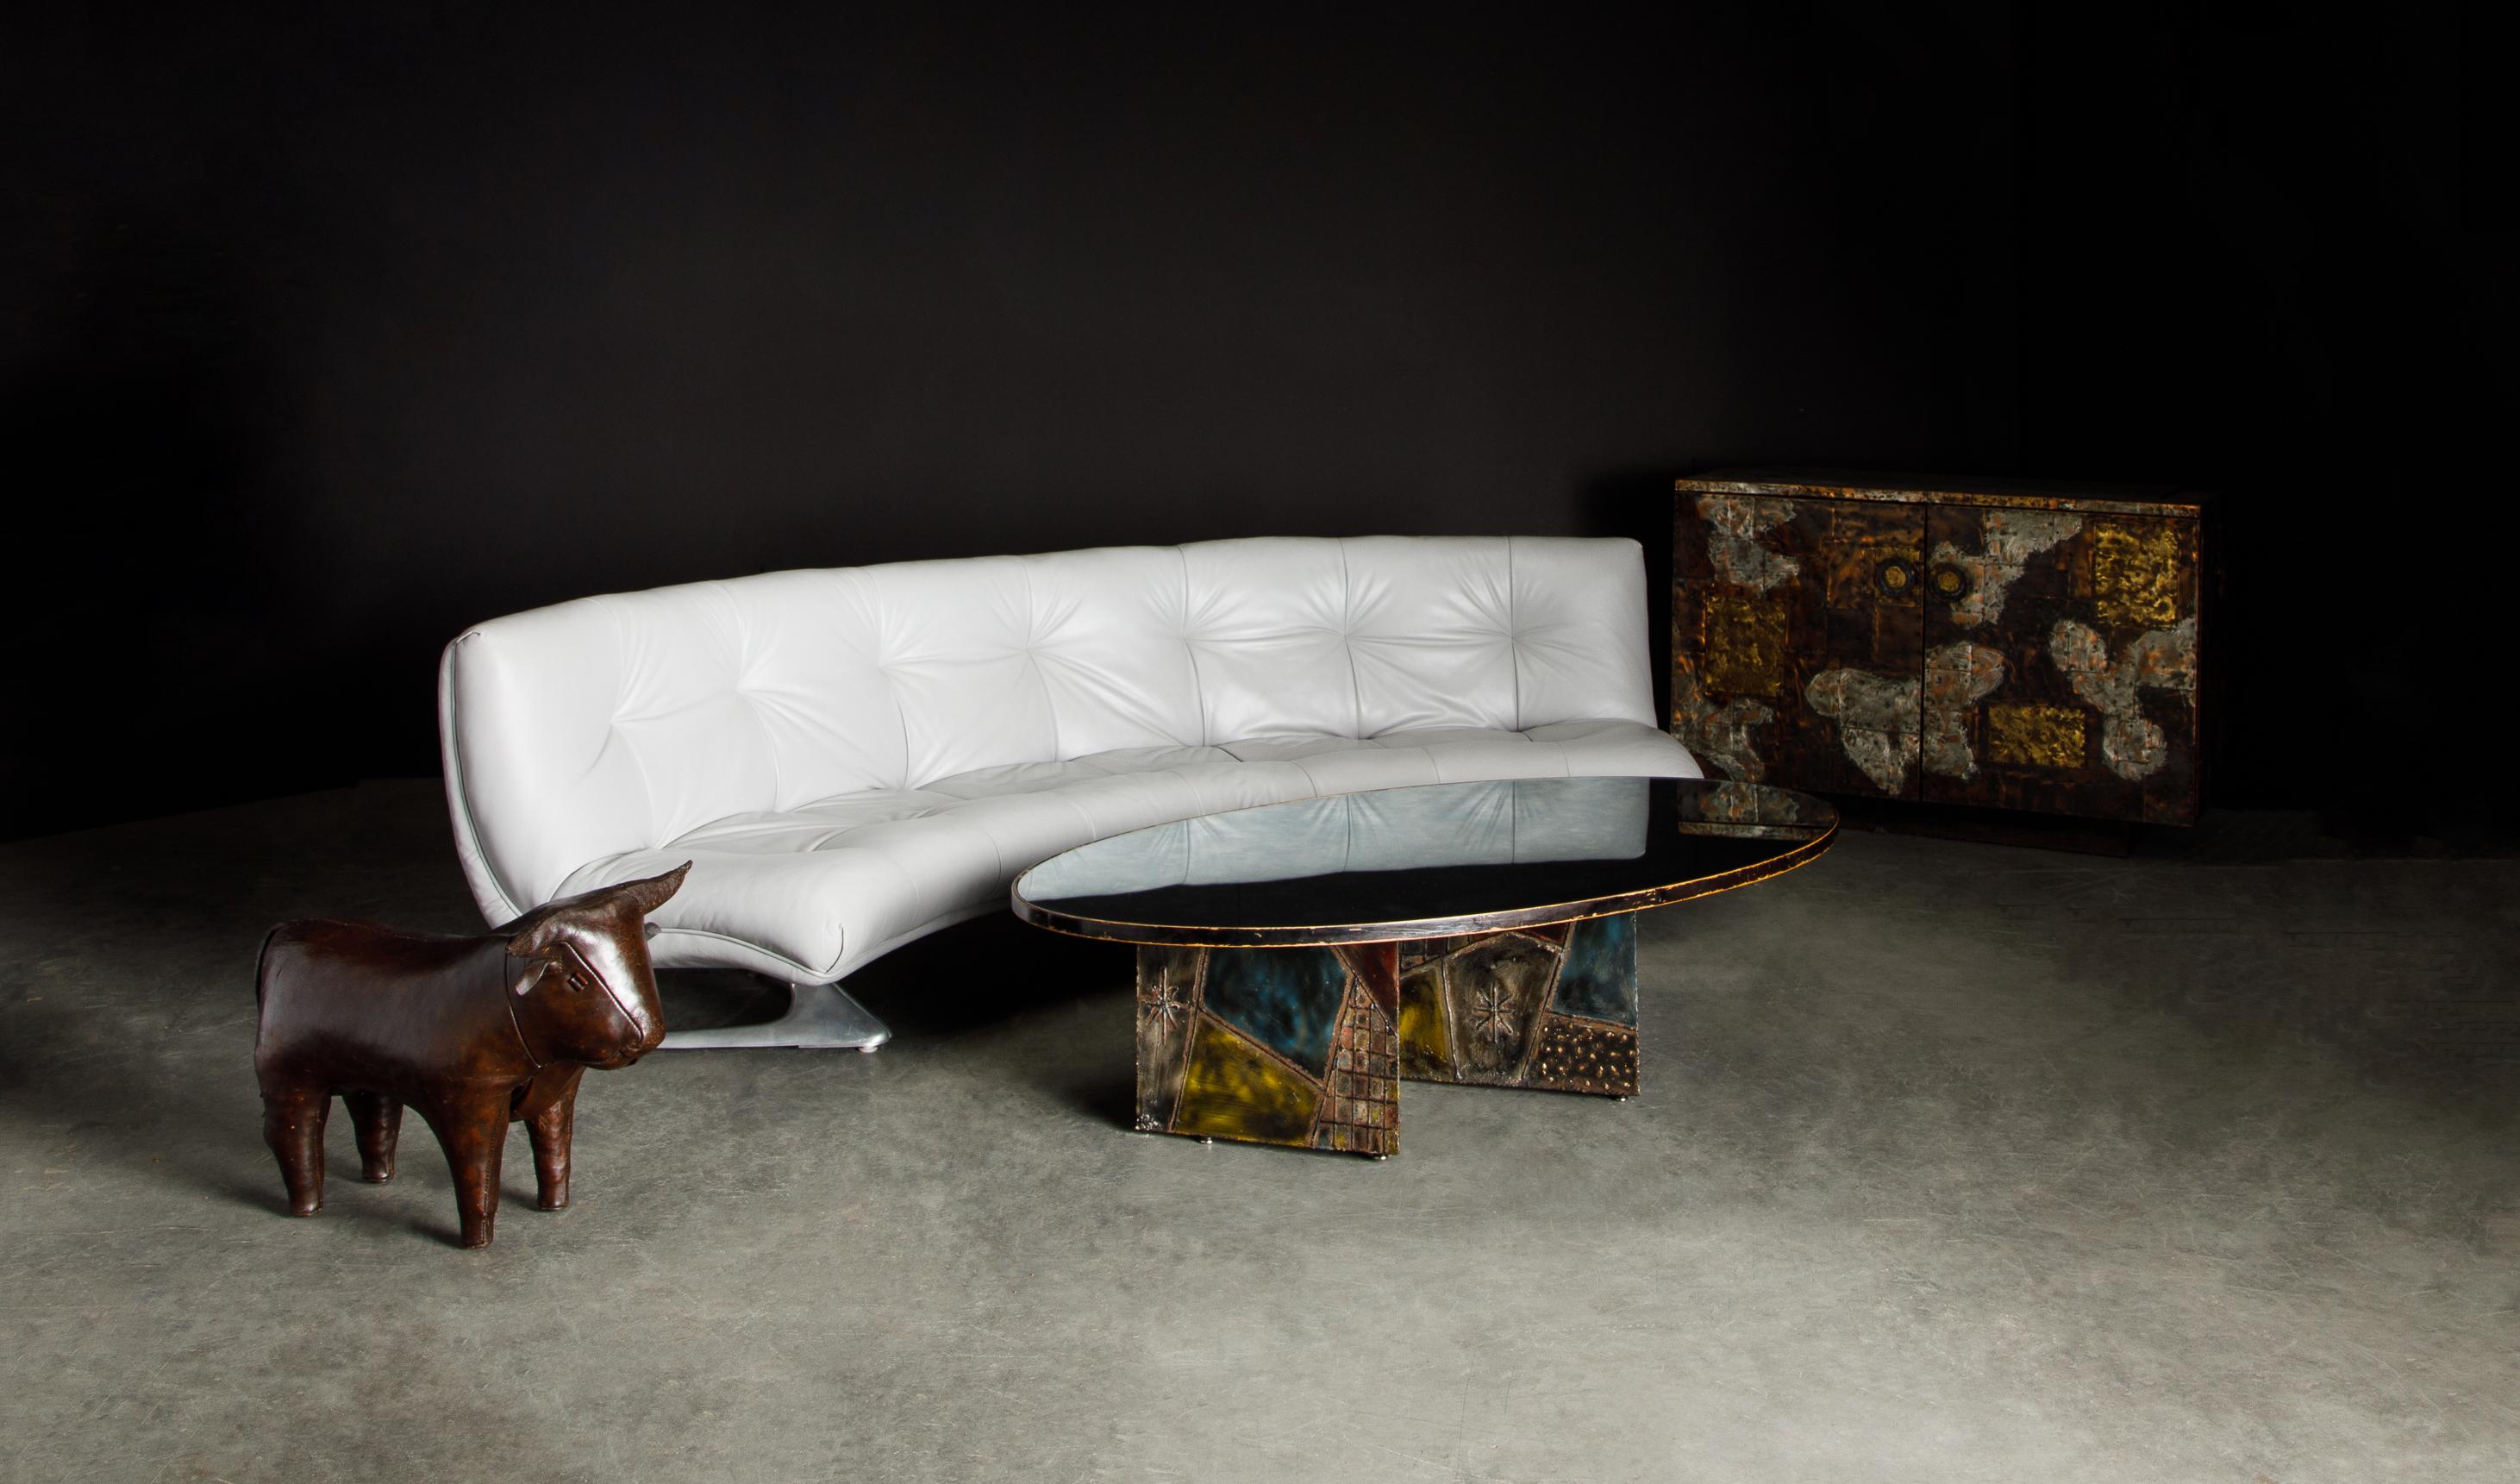 Rare 'Unicorn' Leather and Aluminum Curved Sofa by Vladimir Kagan, c. 1963 For Sale 7